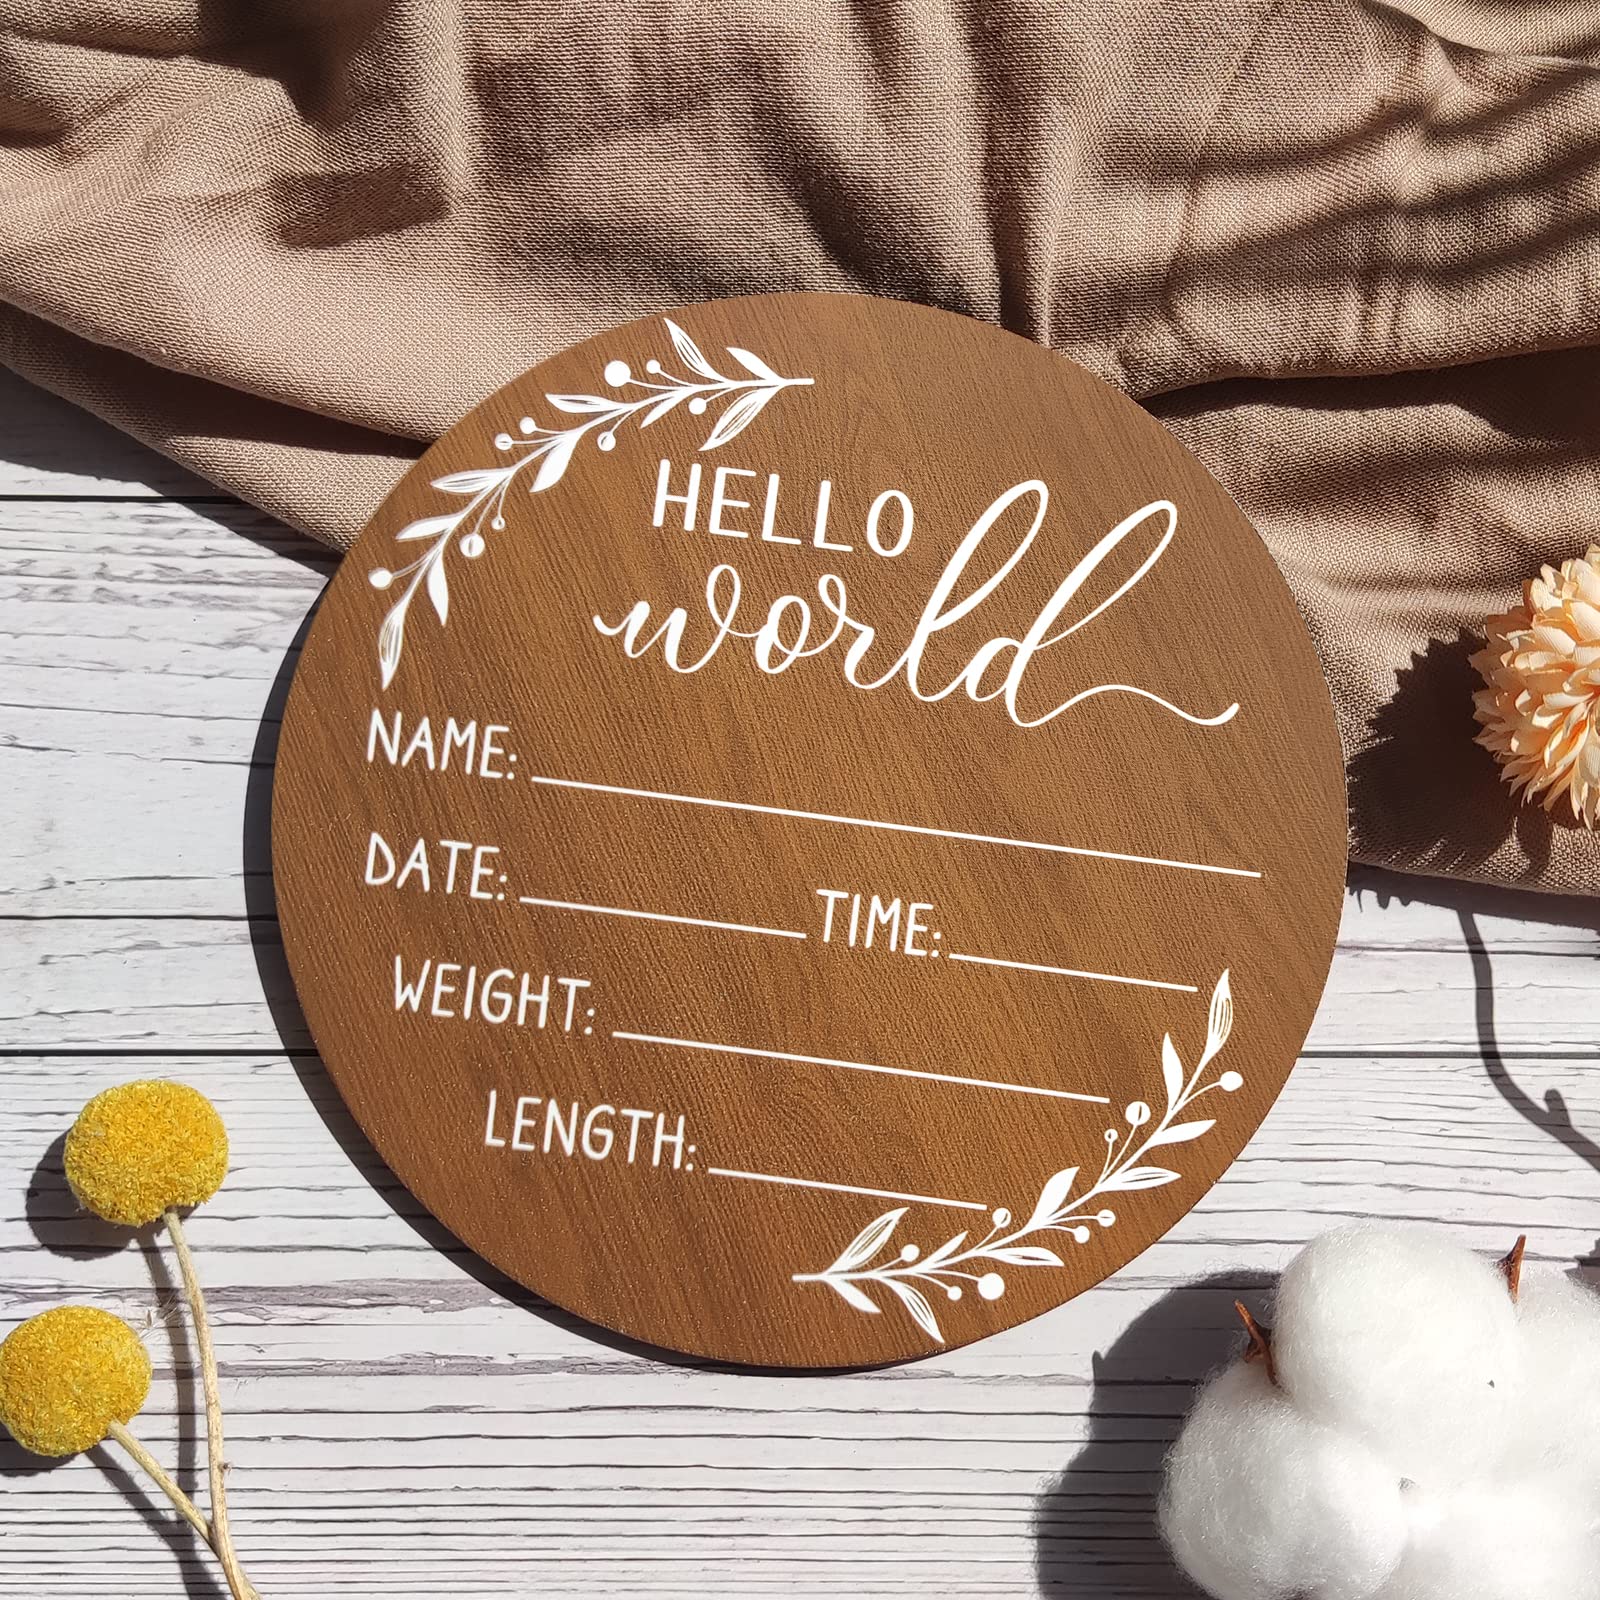 Baby Announcement Sign, Wooden Baby Name Sign for Nursery, Hello World Newborn Sign, Birth Announcement Sign for Hospital, Welcome Baby Arrival Sign Announcement Board for Photo Prop Baby Shower